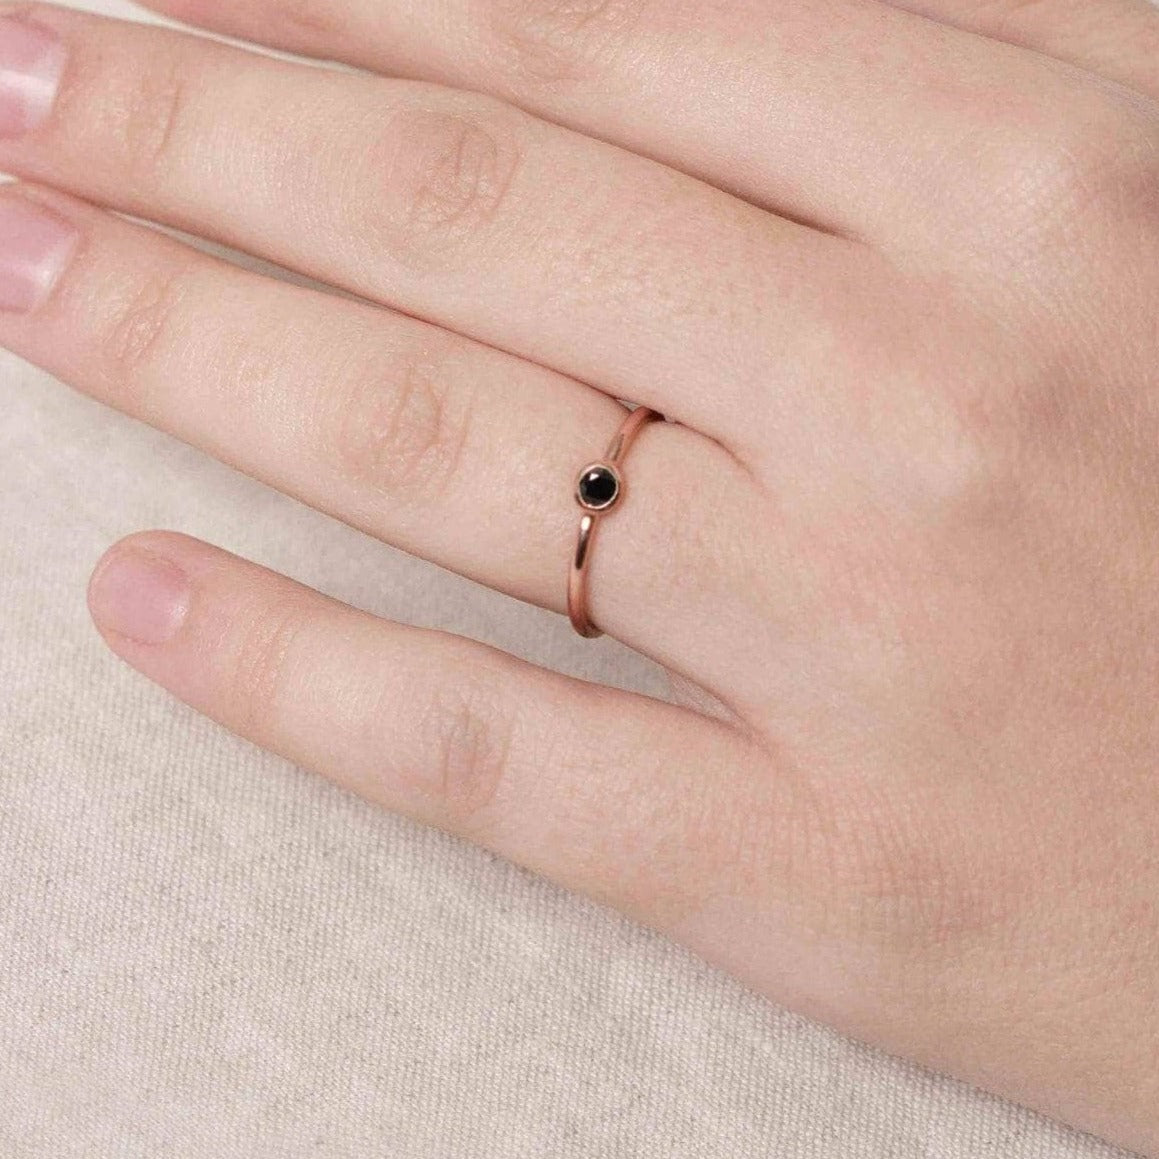 Black Tourmaline Silver, Gold or Rose Gold Ring by Tiny Rituals